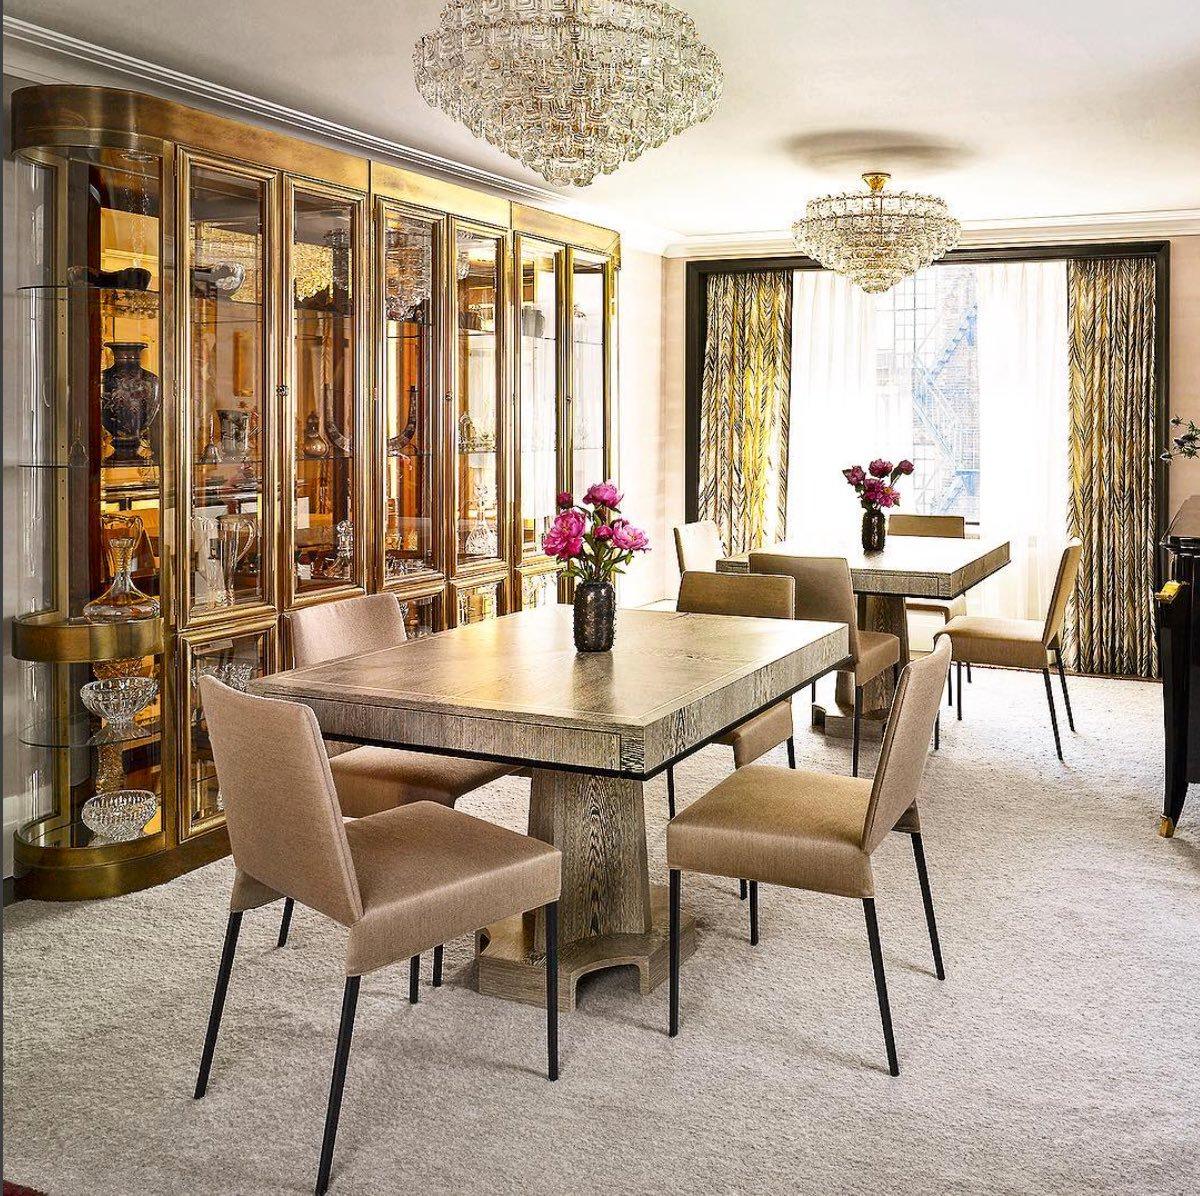 Architecturally-inspired this breathtaking three part brass Curved China cabinet set by Mastercraft, inviting drama into any space. Dedicated to creating hand-constructed furnishings for the home that withstand the test of time with tremendous